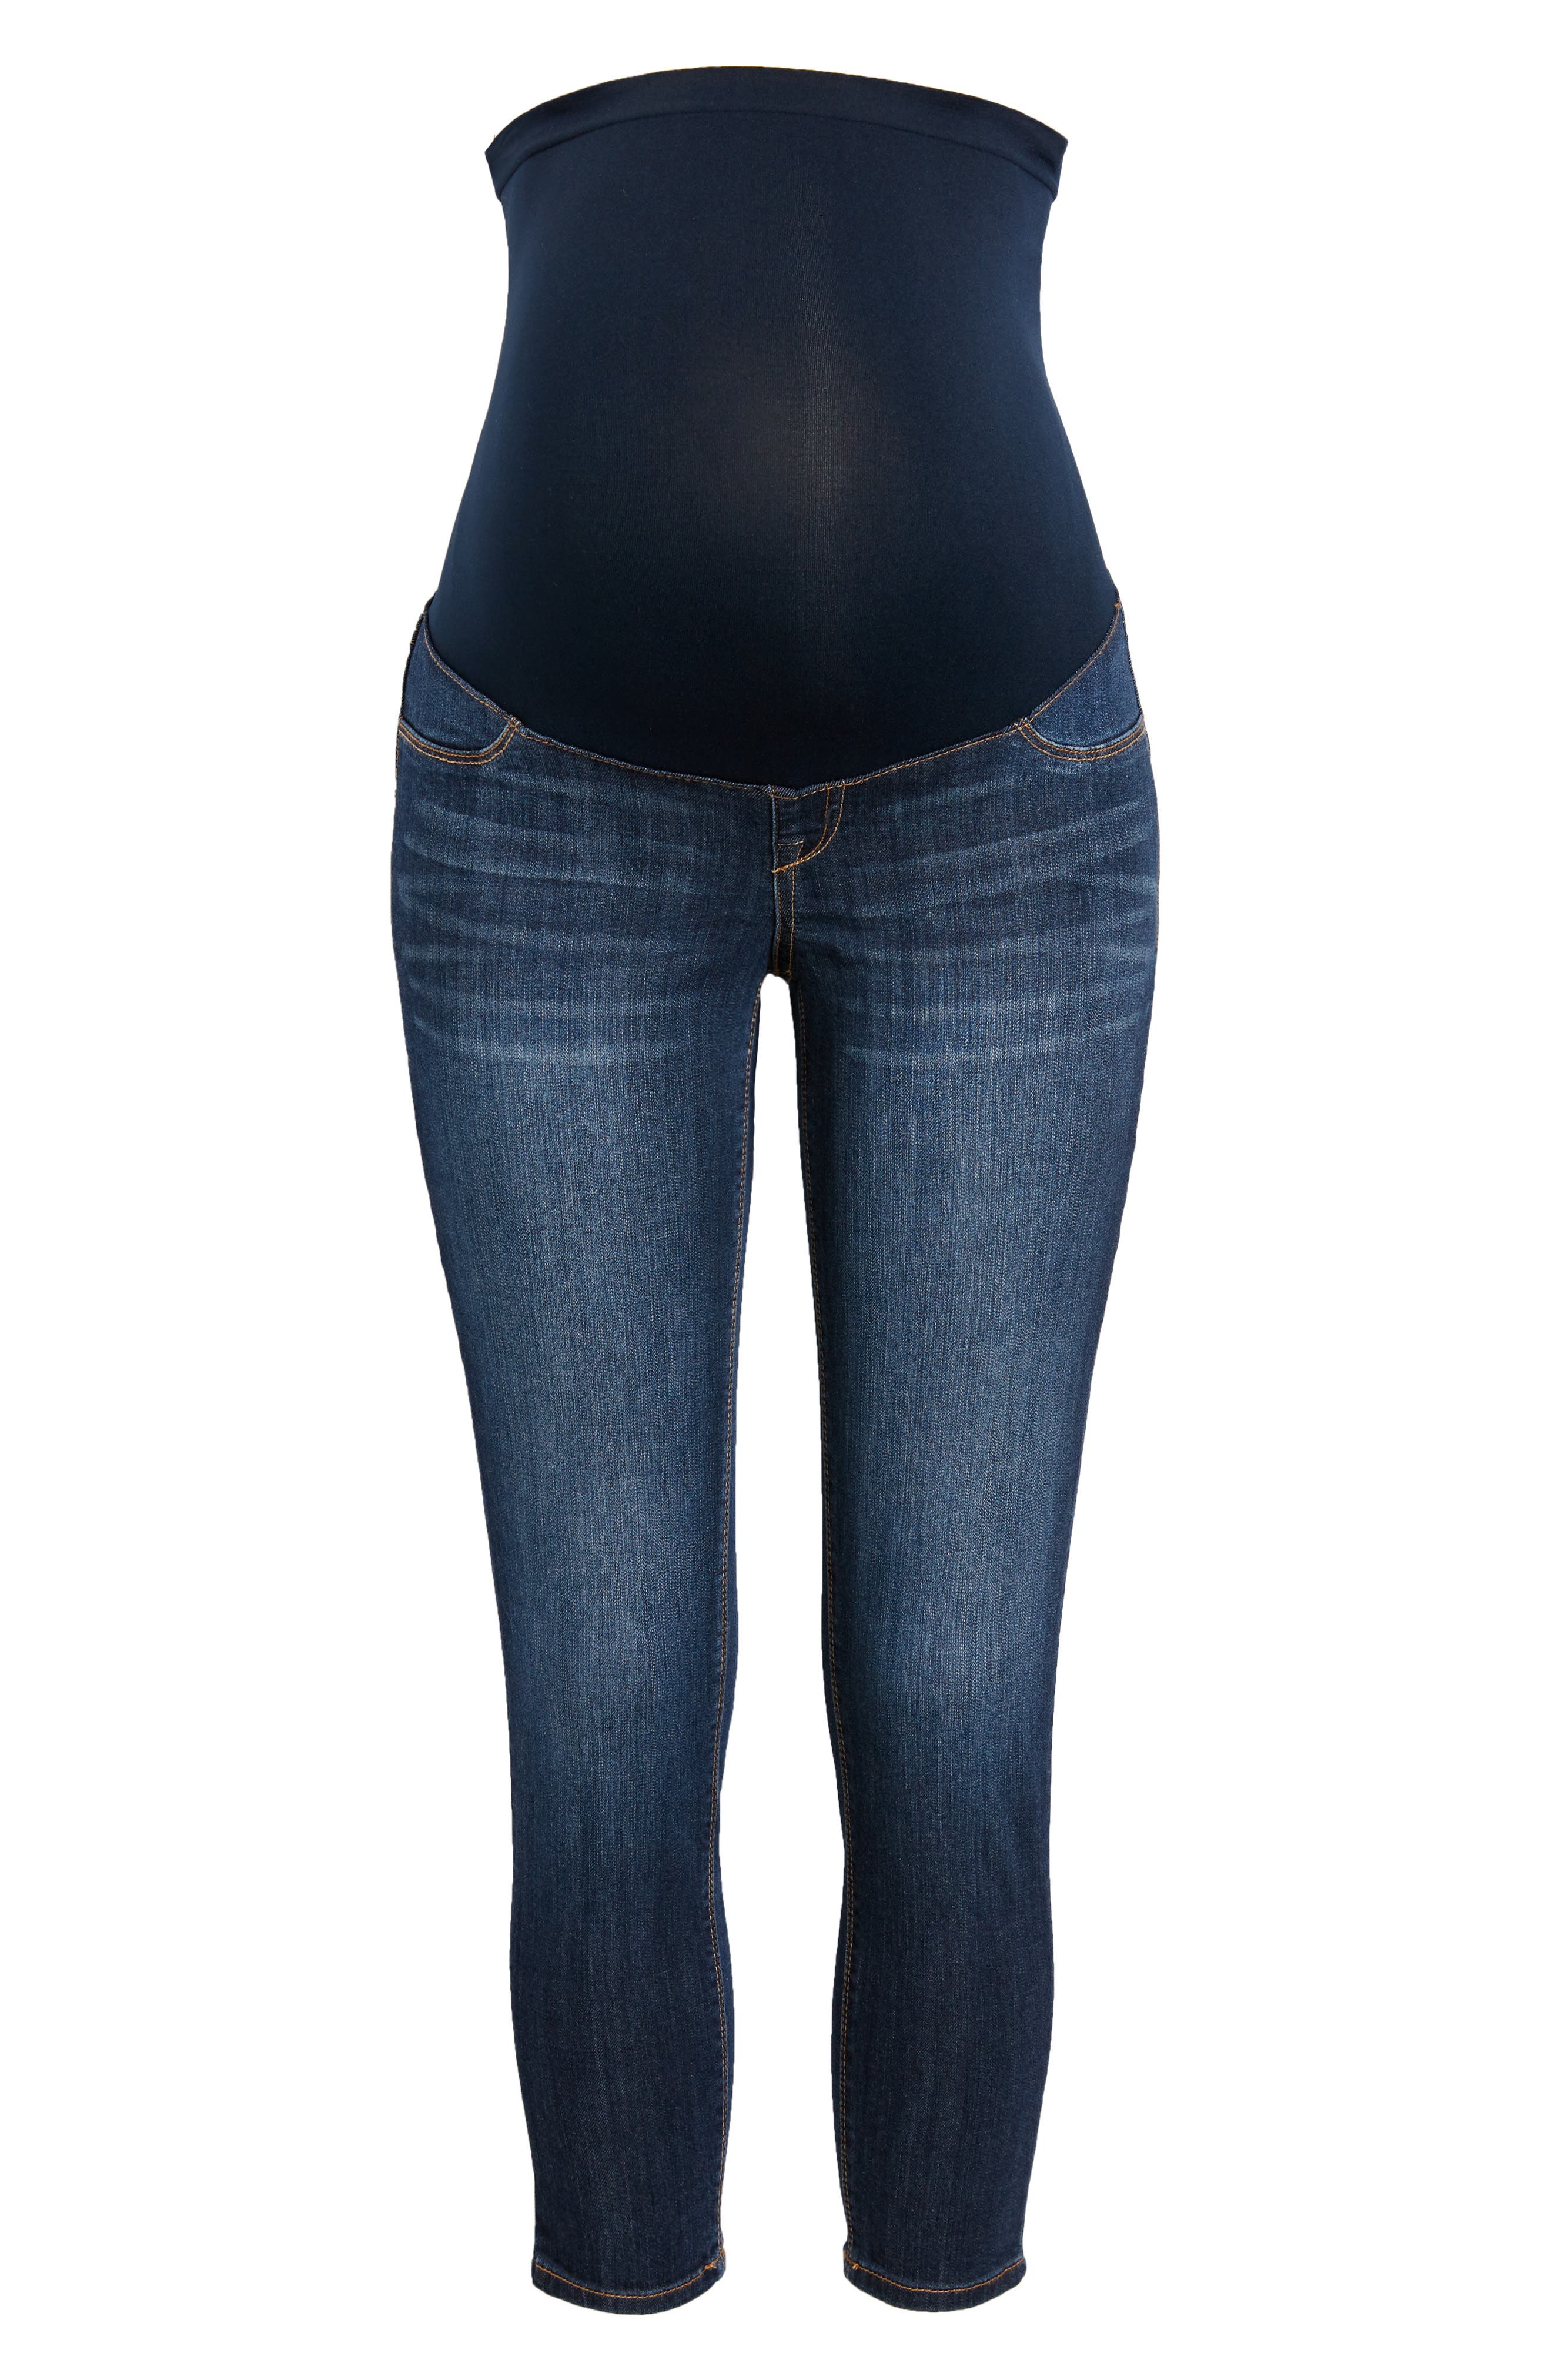 1822 Denim Over The Bump Crop Skinny Maternity Jeans In Lennox At Nordstrom, Size 27